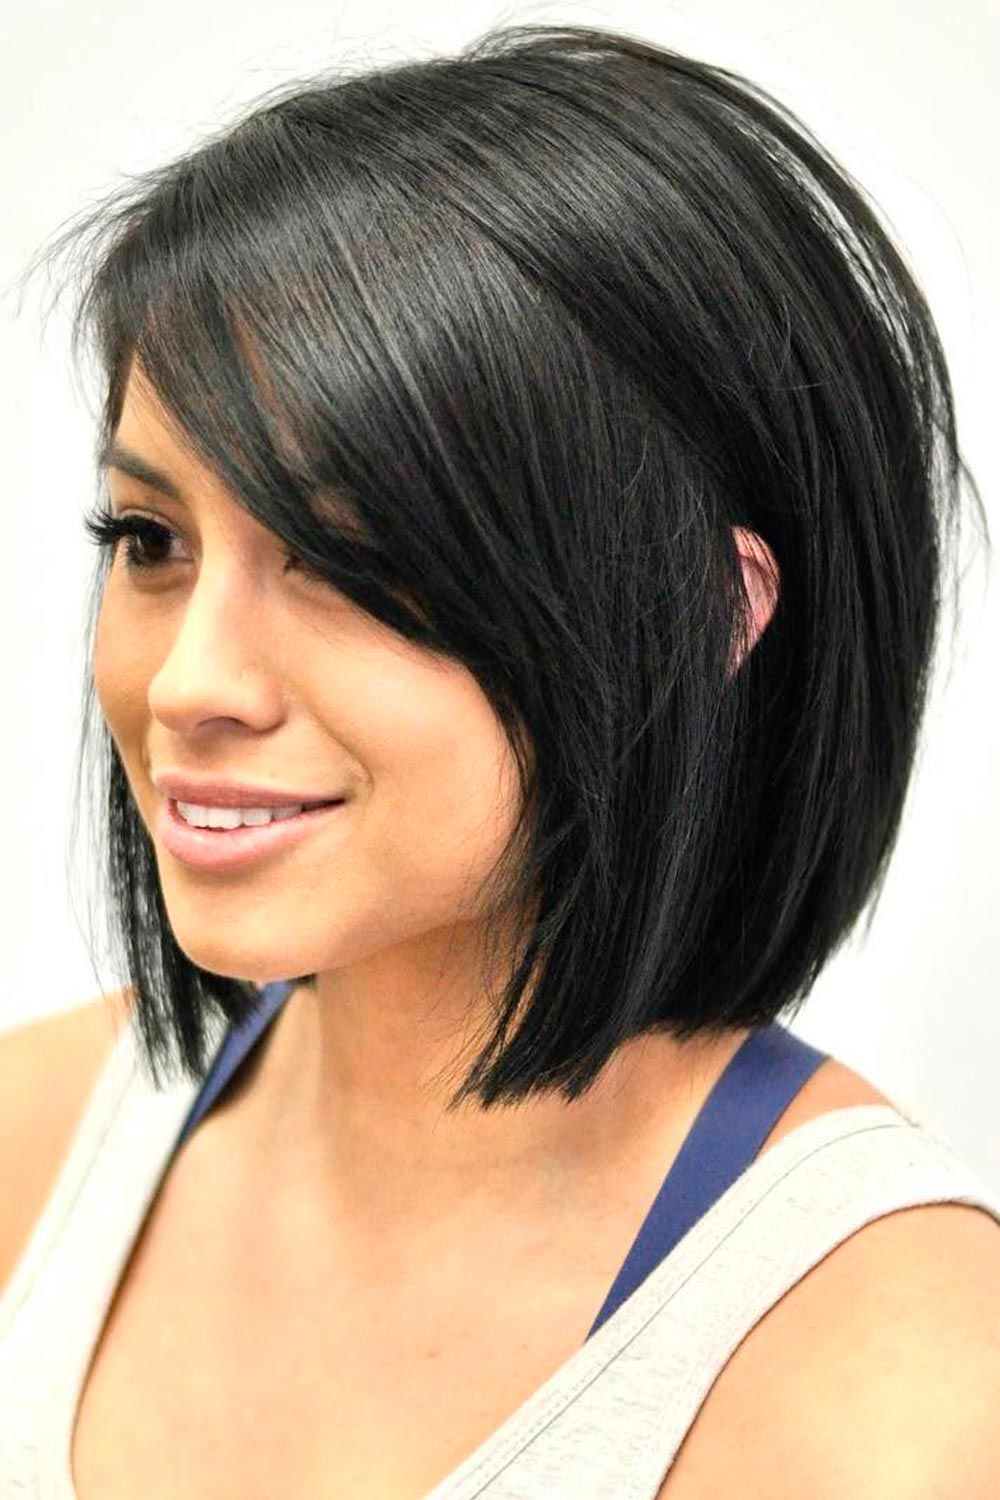 18 short bob hairstyles that'll have you running to the salon!